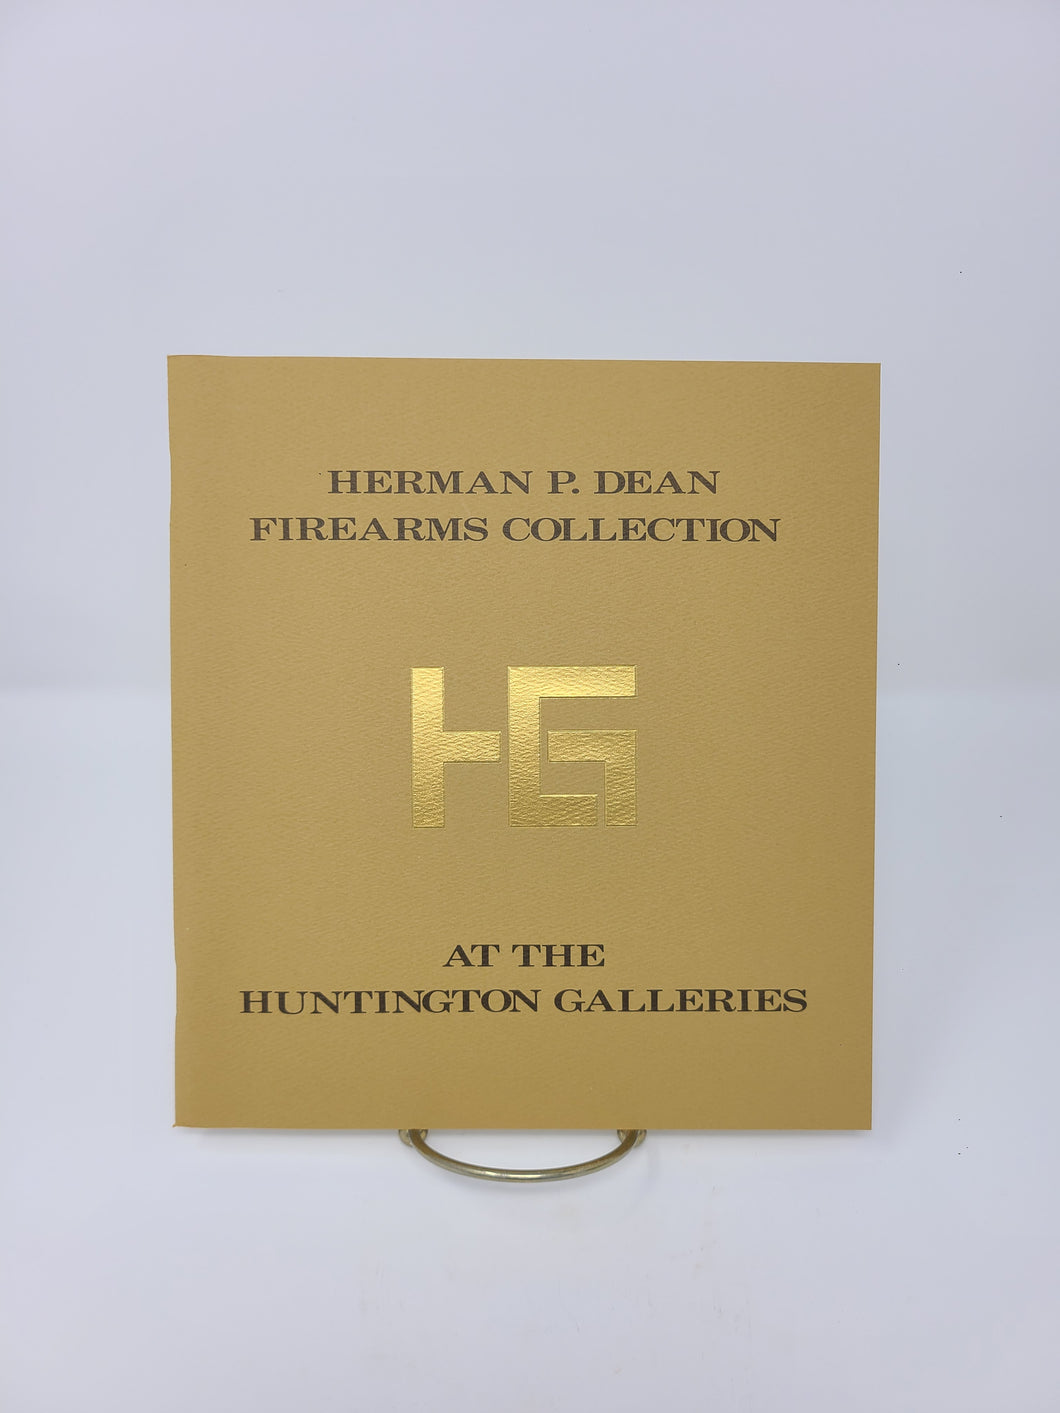 Herman P. Dean Firearms Collection at the Huntington Galleries